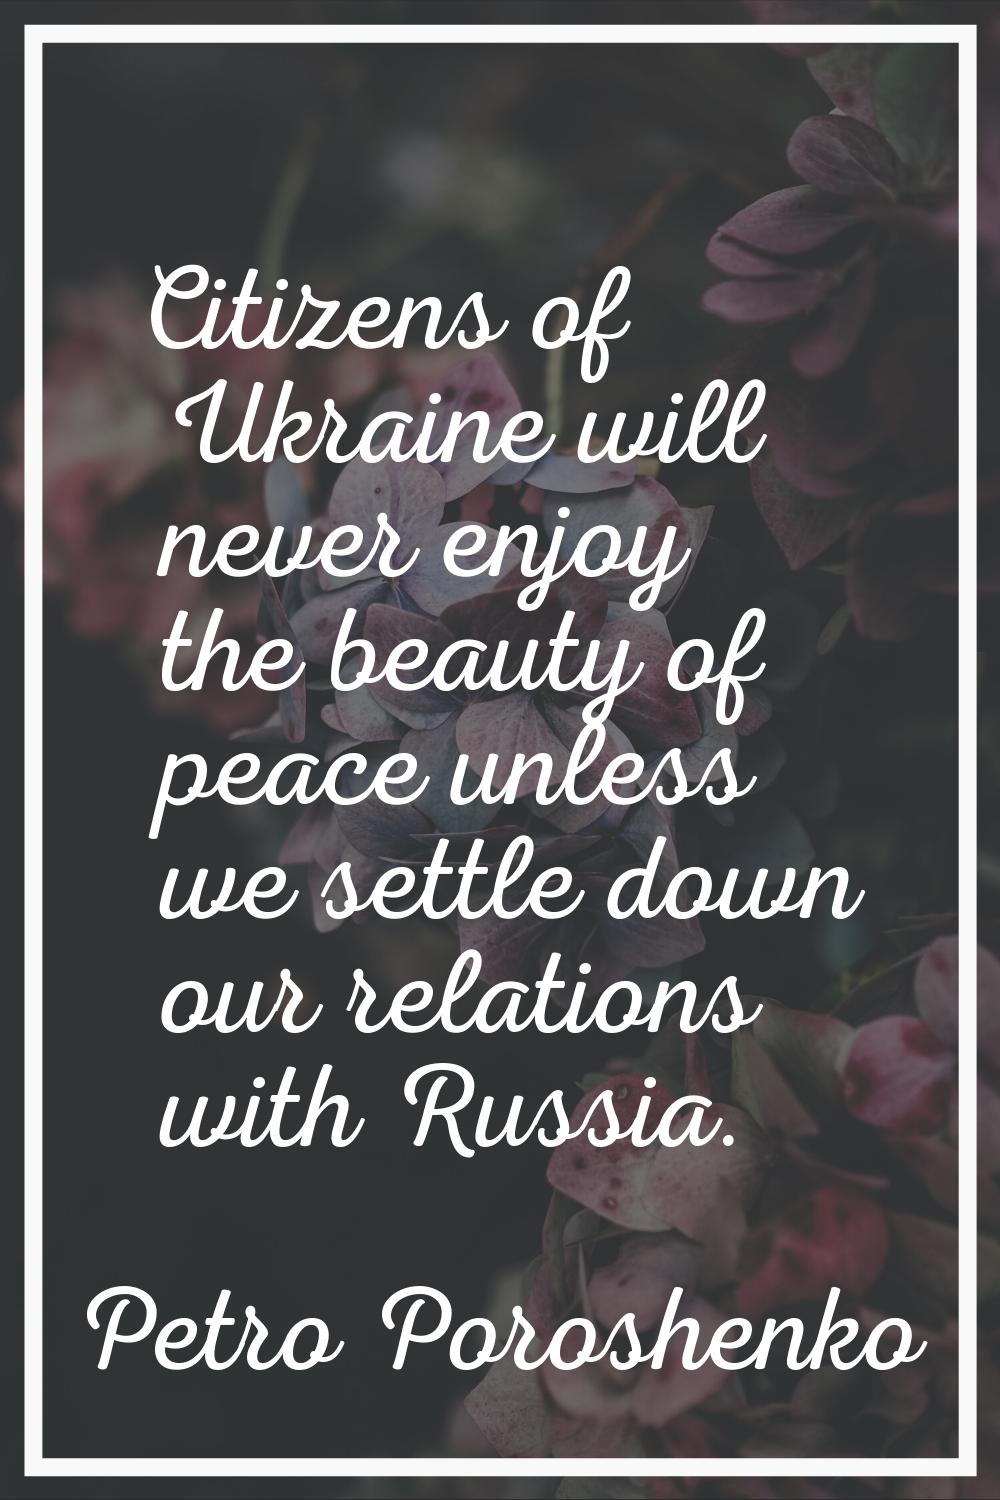 Citizens of Ukraine will never enjoy the beauty of peace unless we settle down our relations with R